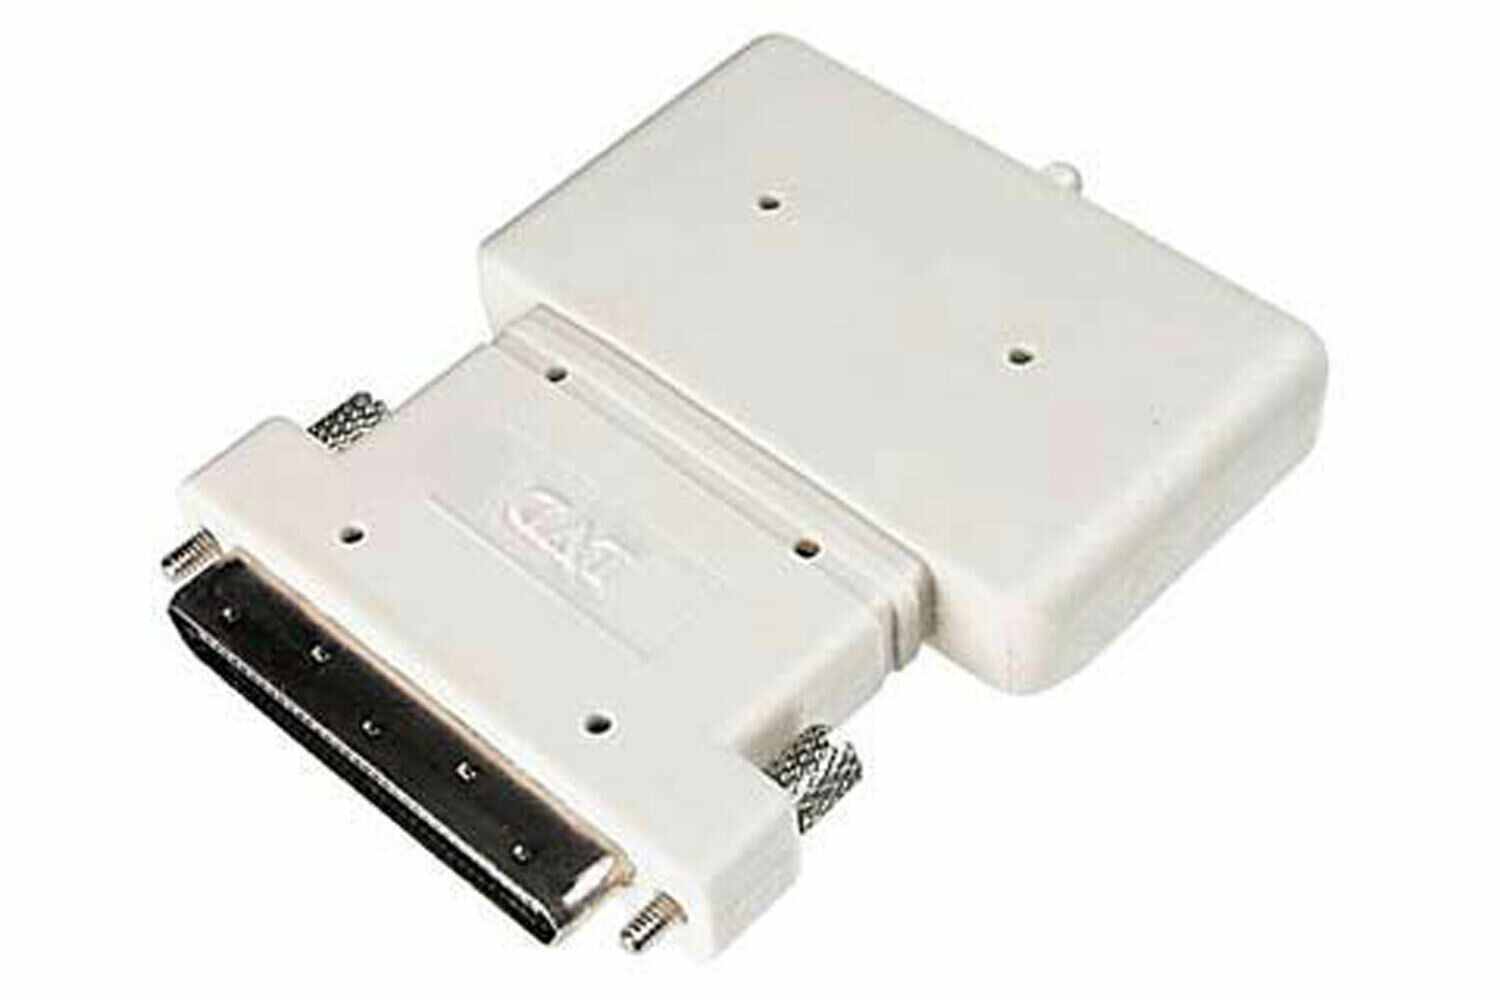 SCSI 0.8mm VHDCI 68-Pin Male External LVD Terminator with LED